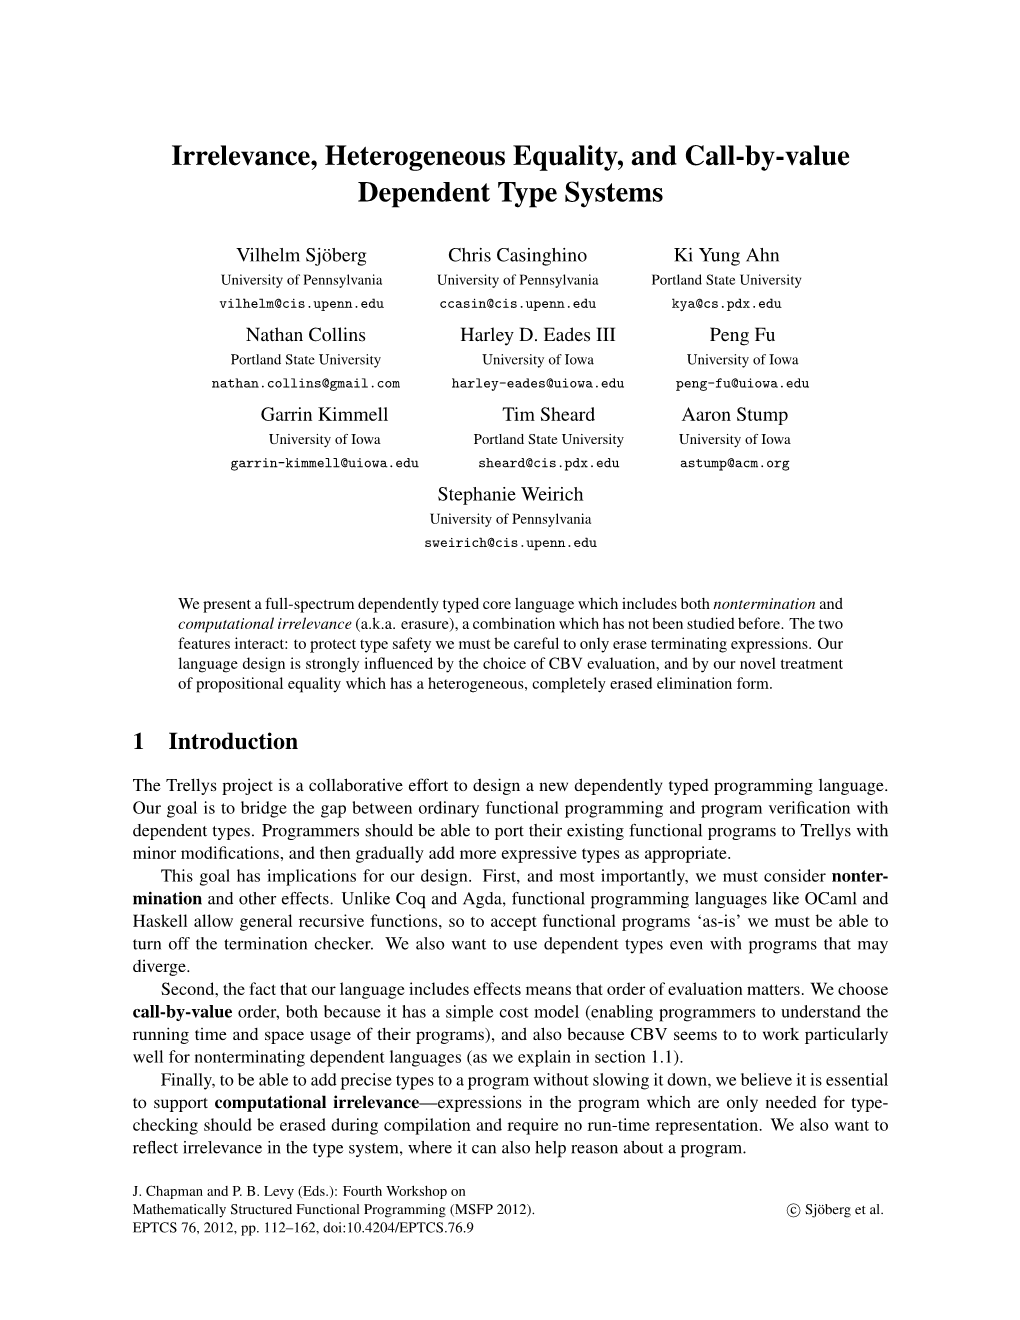 Irrelevance, Heterogeneous Equality, and Call-By-Value Dependent Type Systems